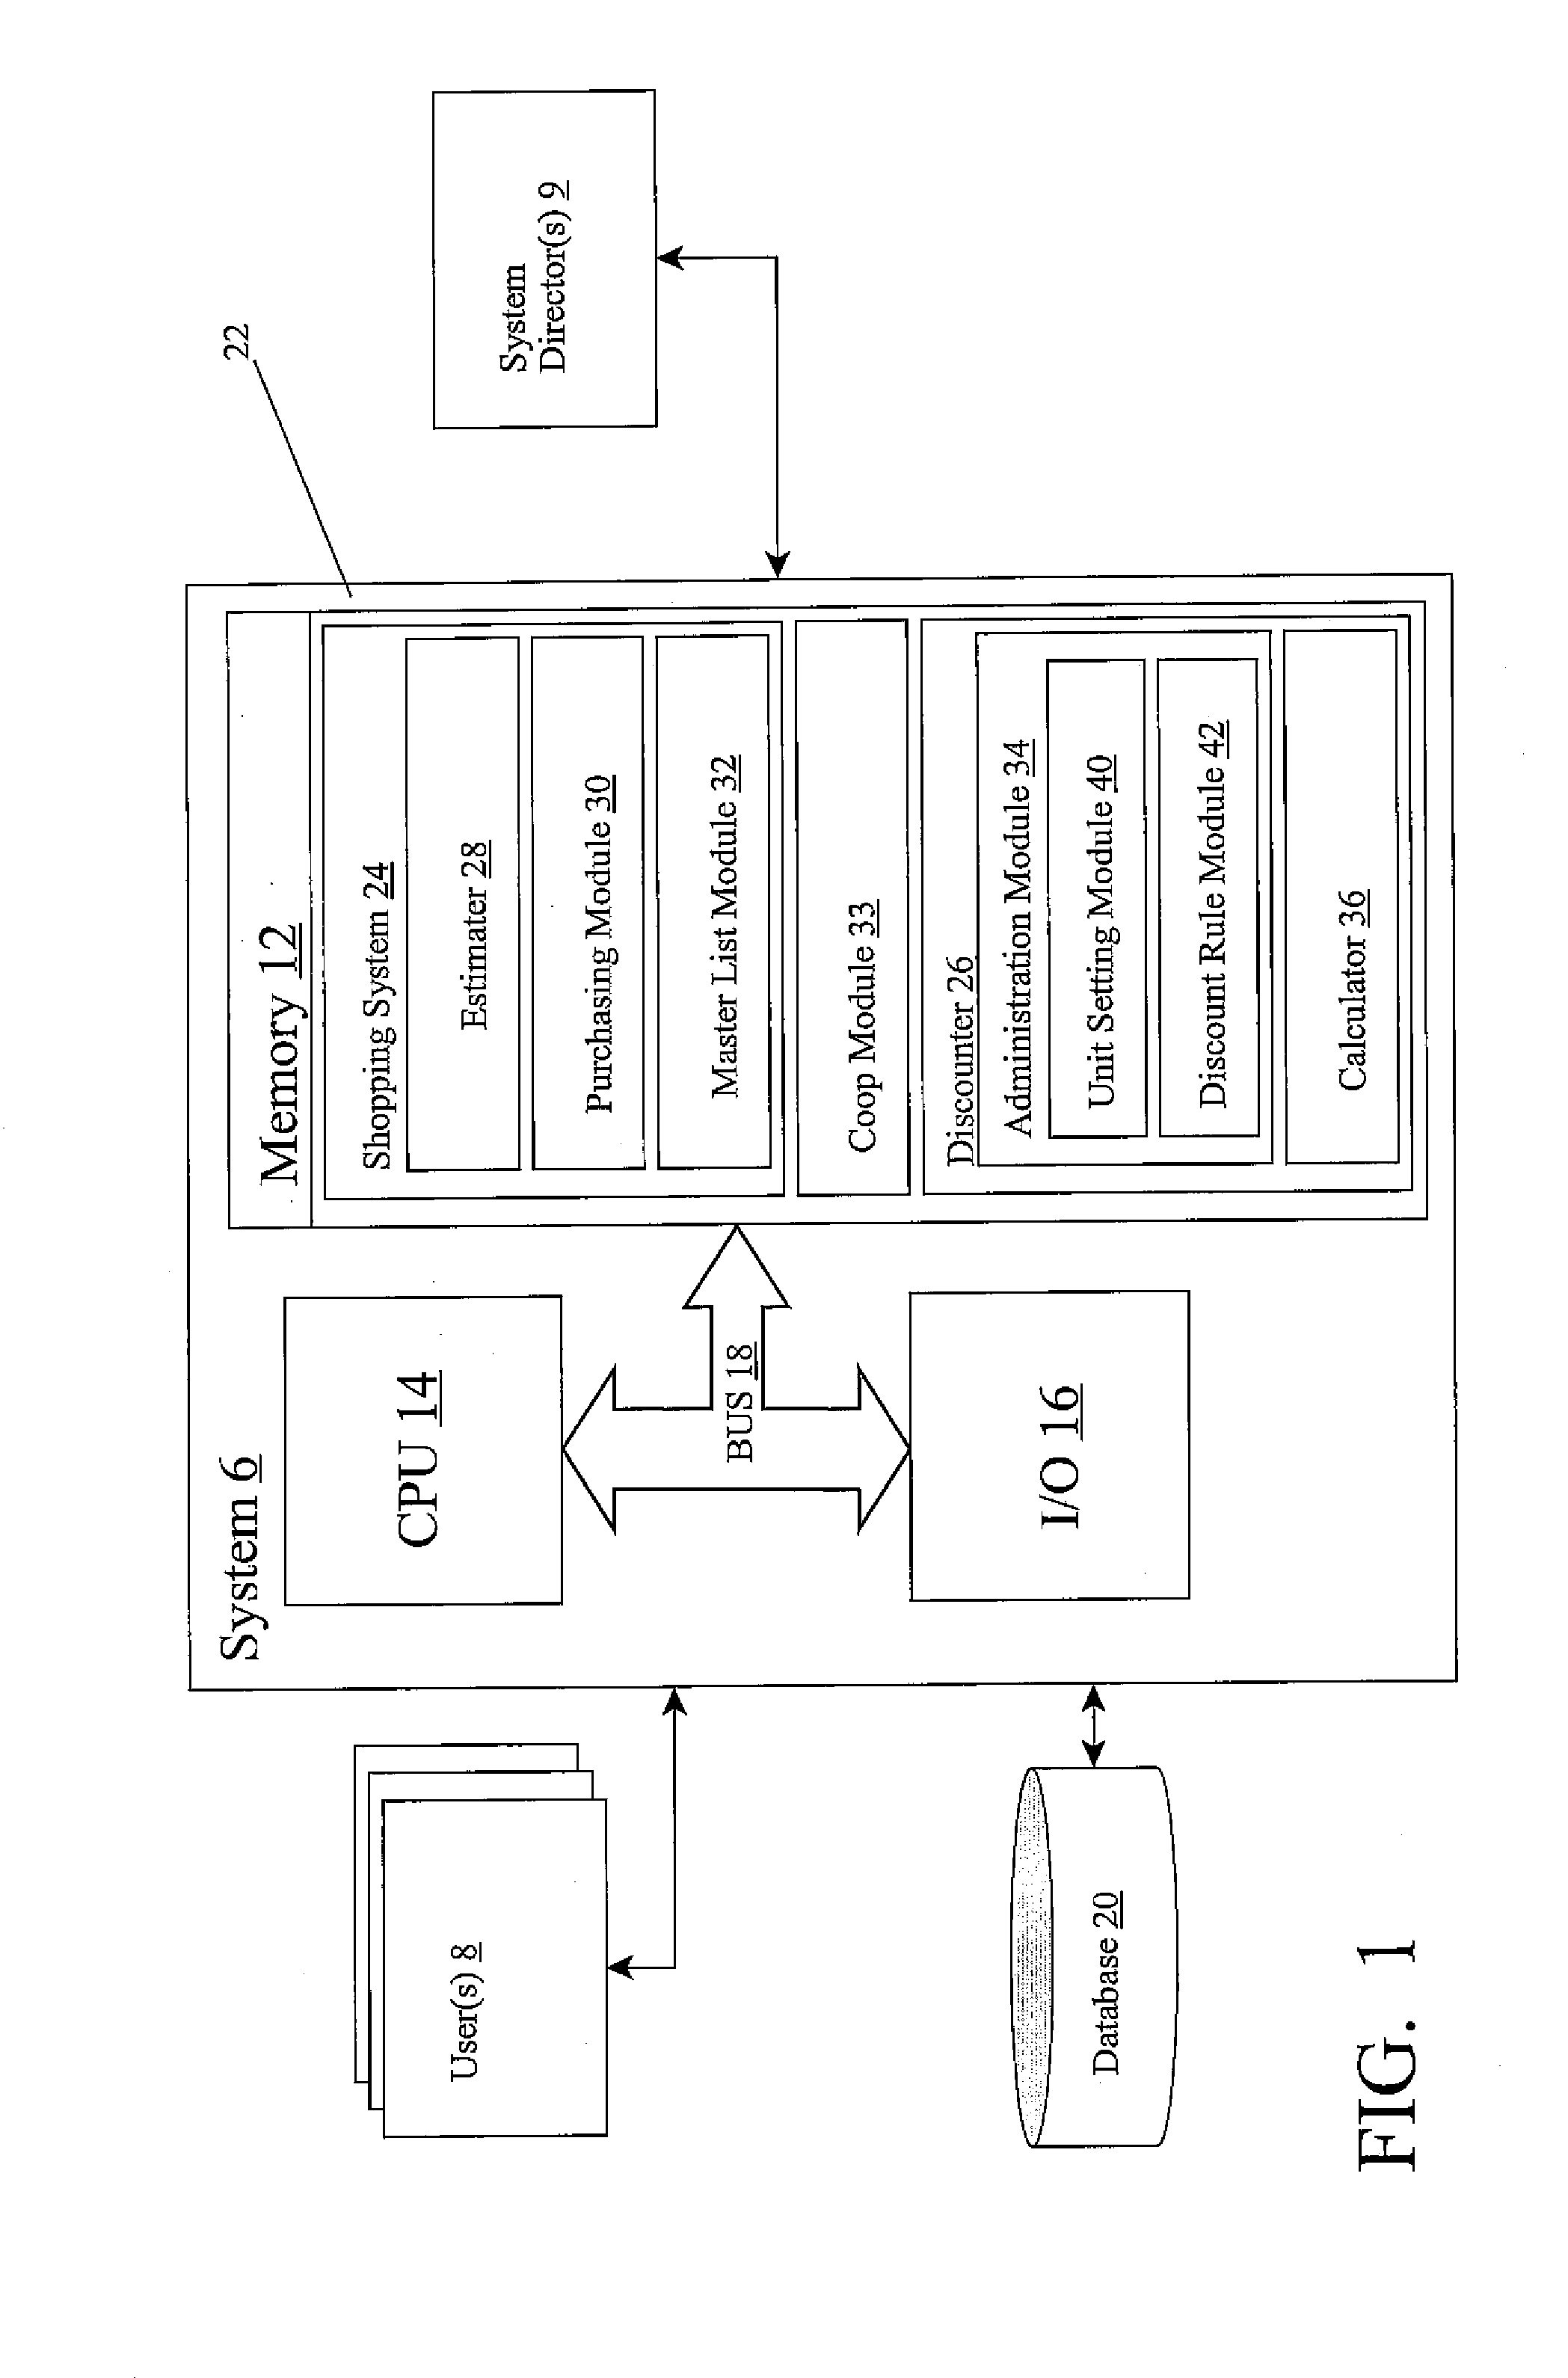 Discount estimating and purchase system and method